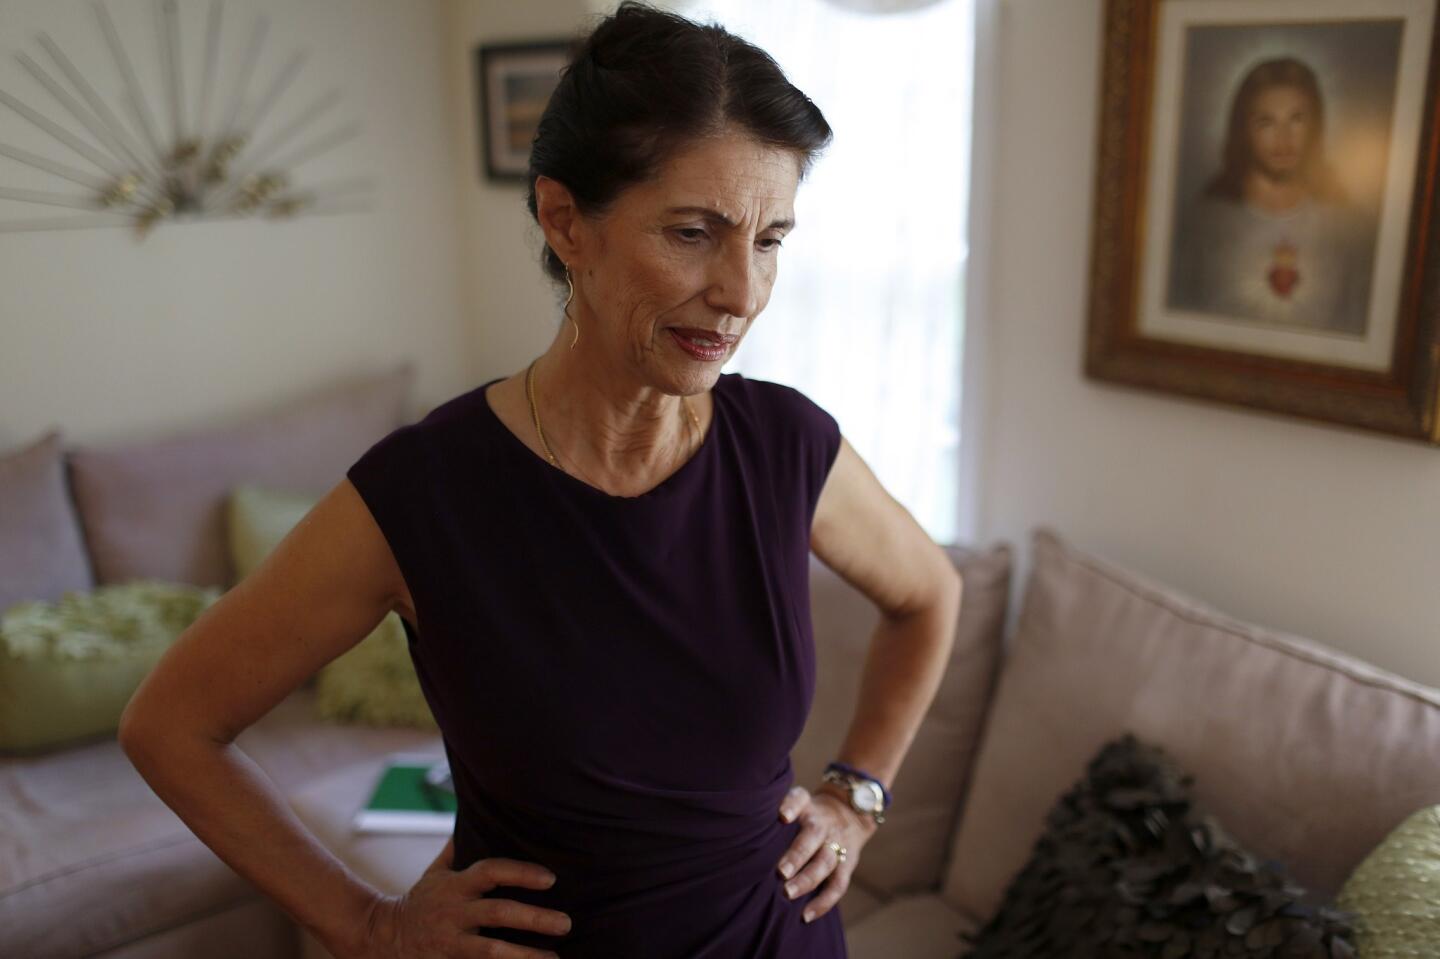 Diane Foley, mother of James Foley, during an interview at her home in Rochester, N.H., on Aug. 24, 2014.